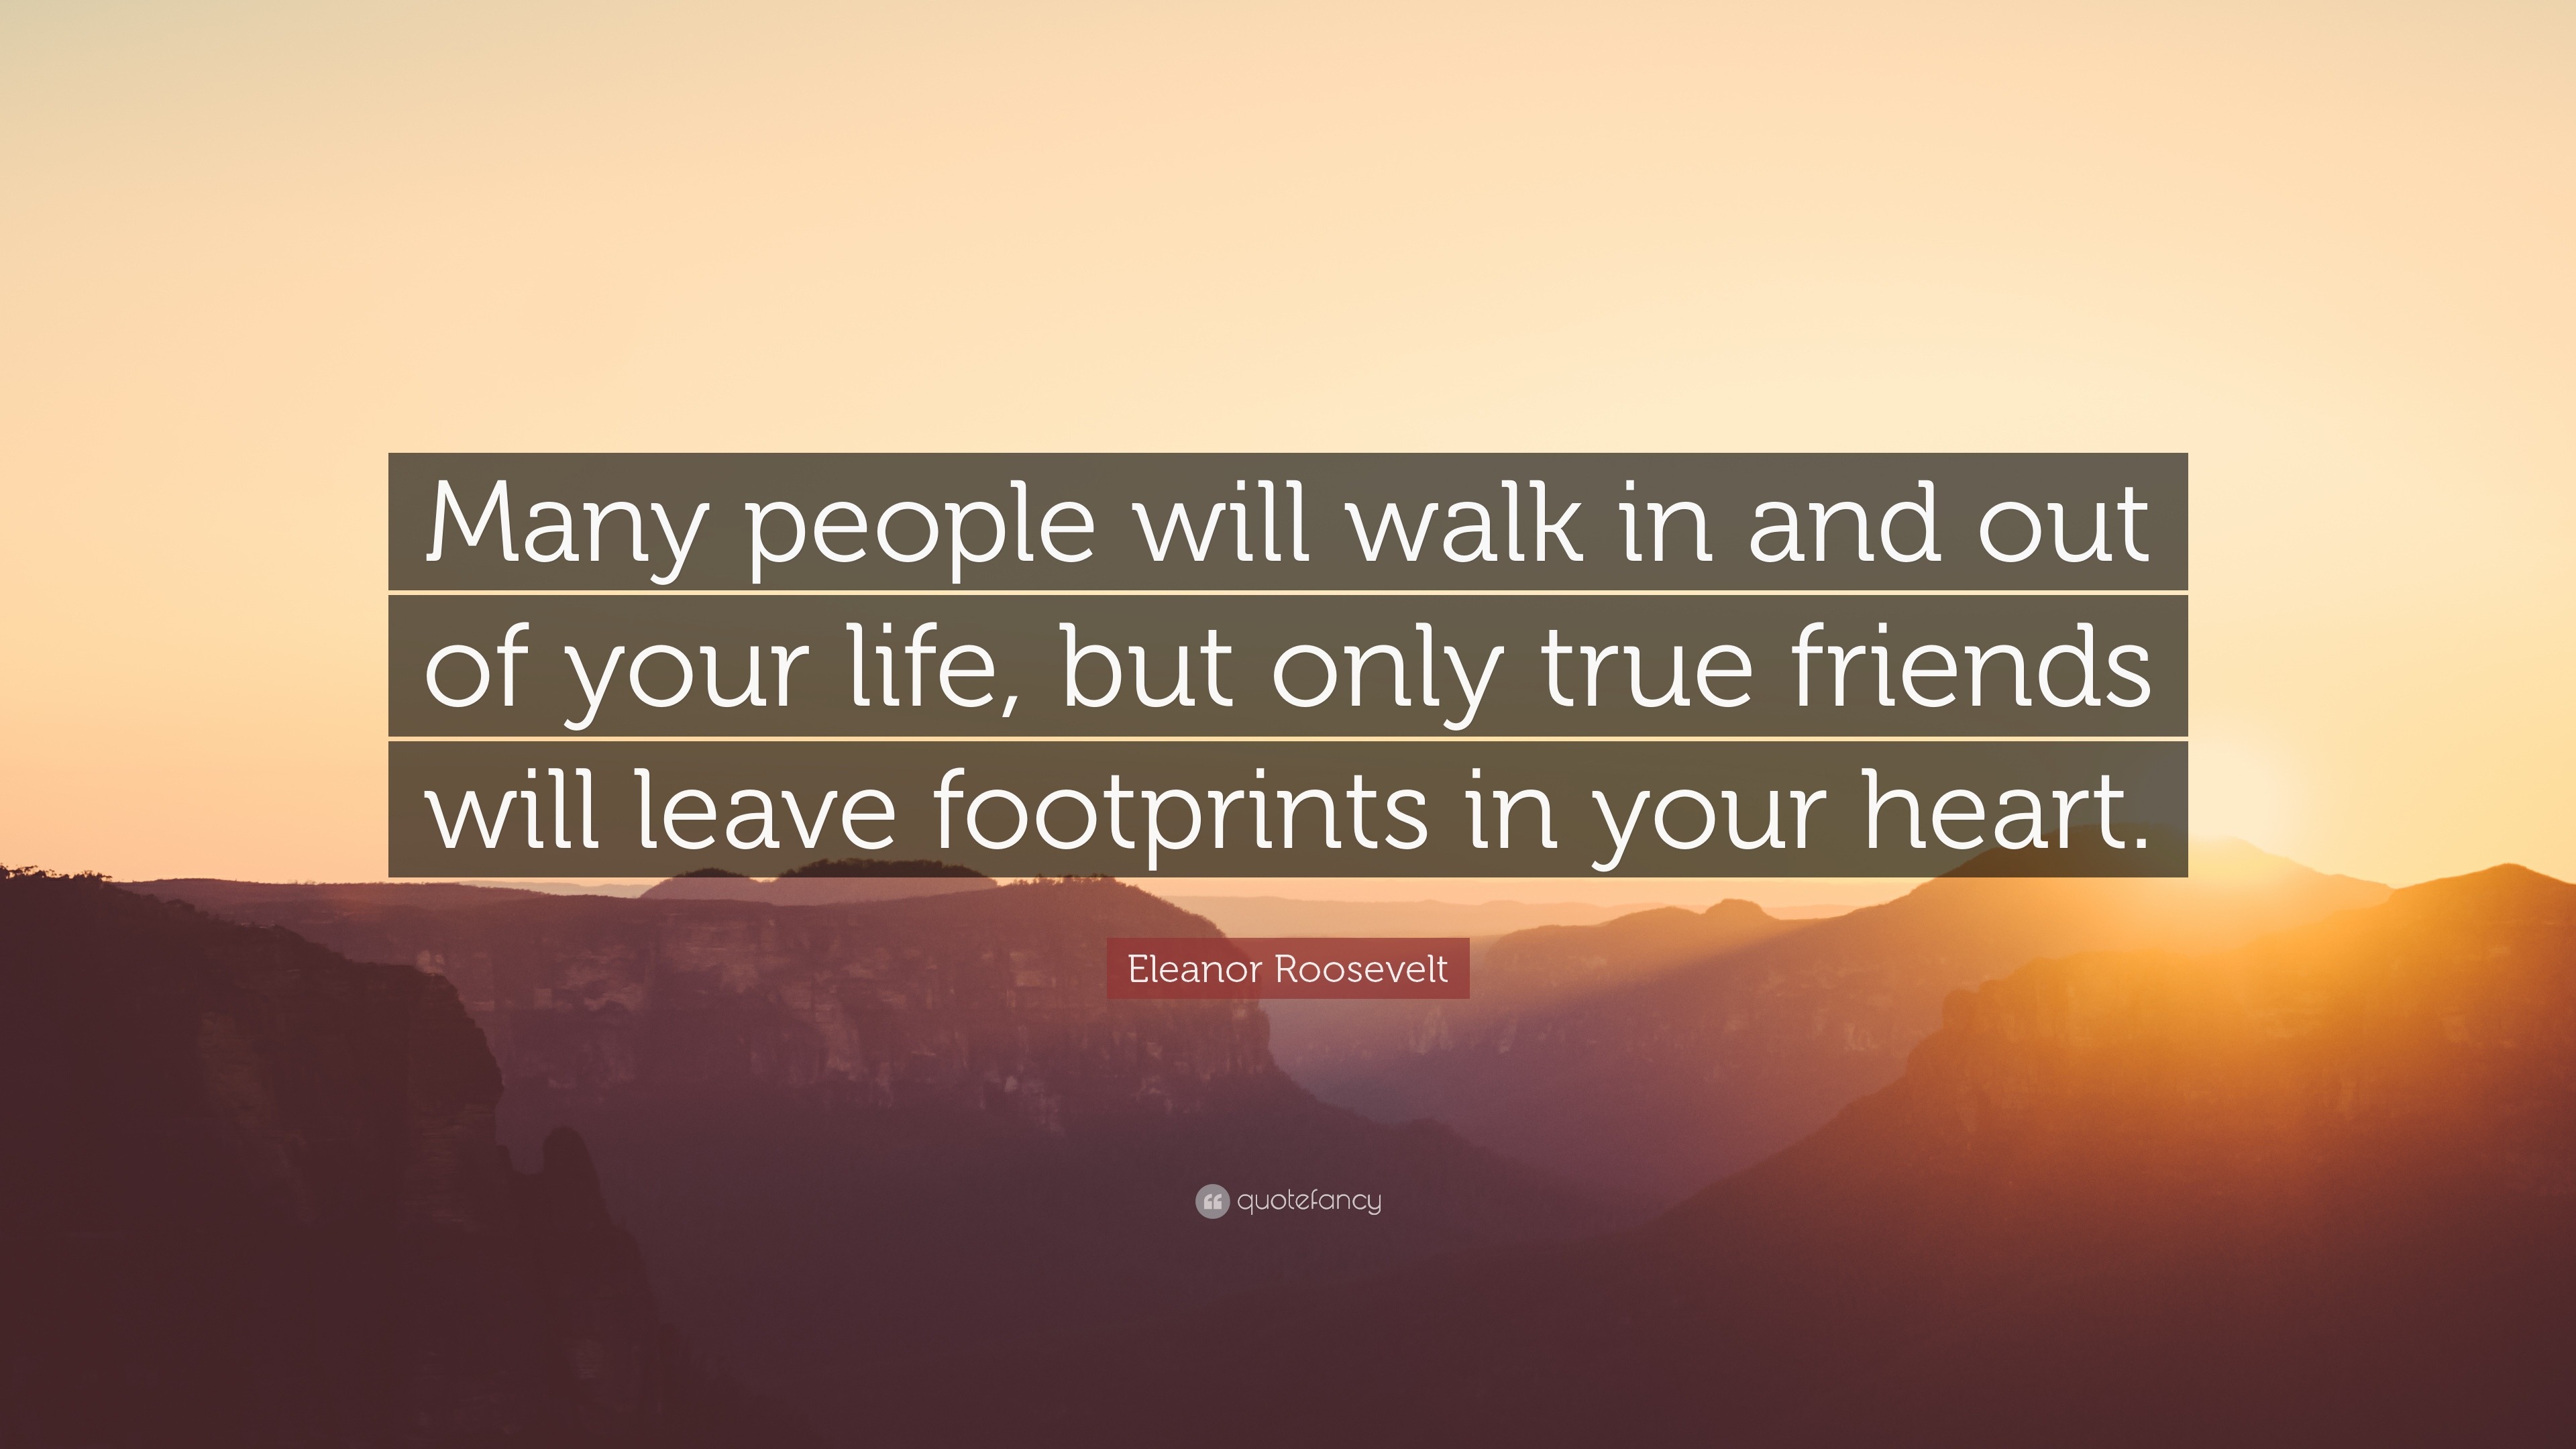 Eleanor Roosevelt Quote “Many people will walk in and out of your life